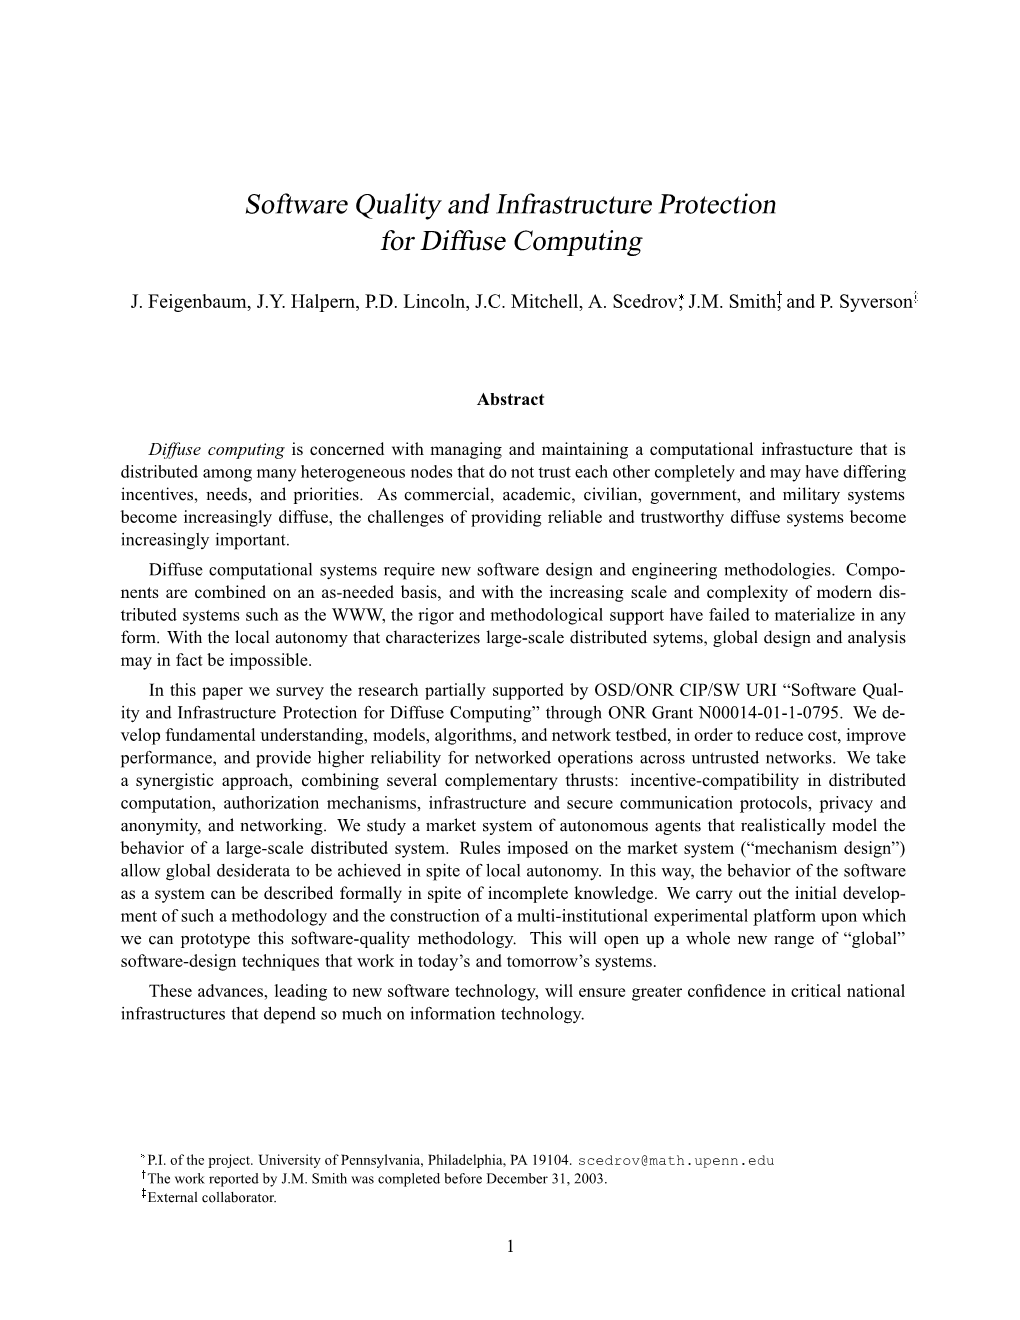 Software Quality and Infrastructure Protection for Diffuse Computing